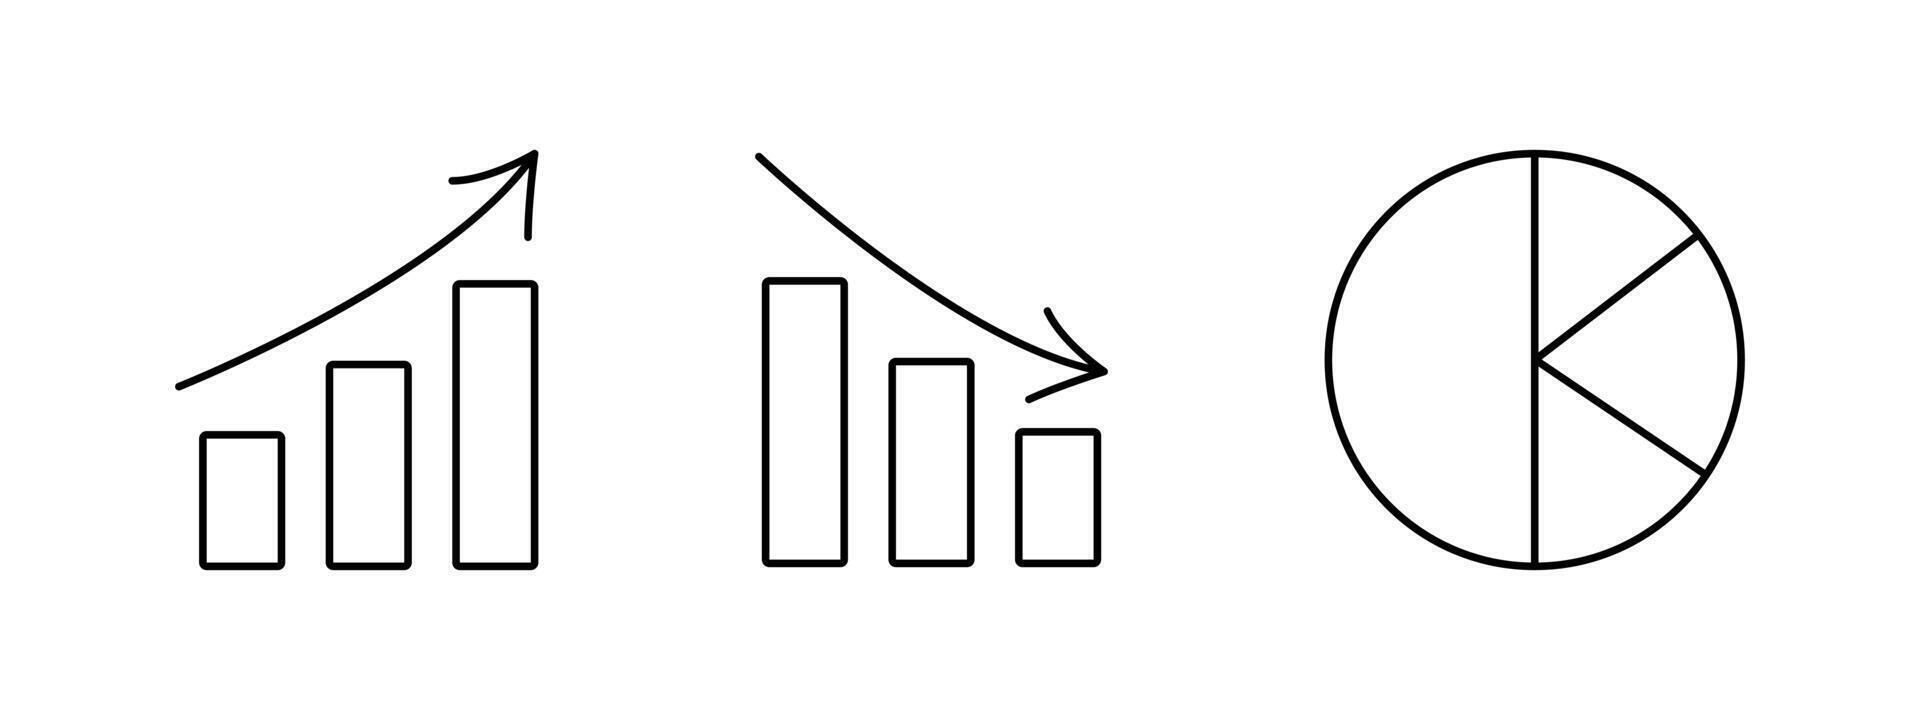 Pie, line charts. Graph, diagram. Statistics Outline icons. Growth rate. Data visualization. Rise and fall of finance, stocks. Graphical representation of data. Arrows. Contour illustration. vector